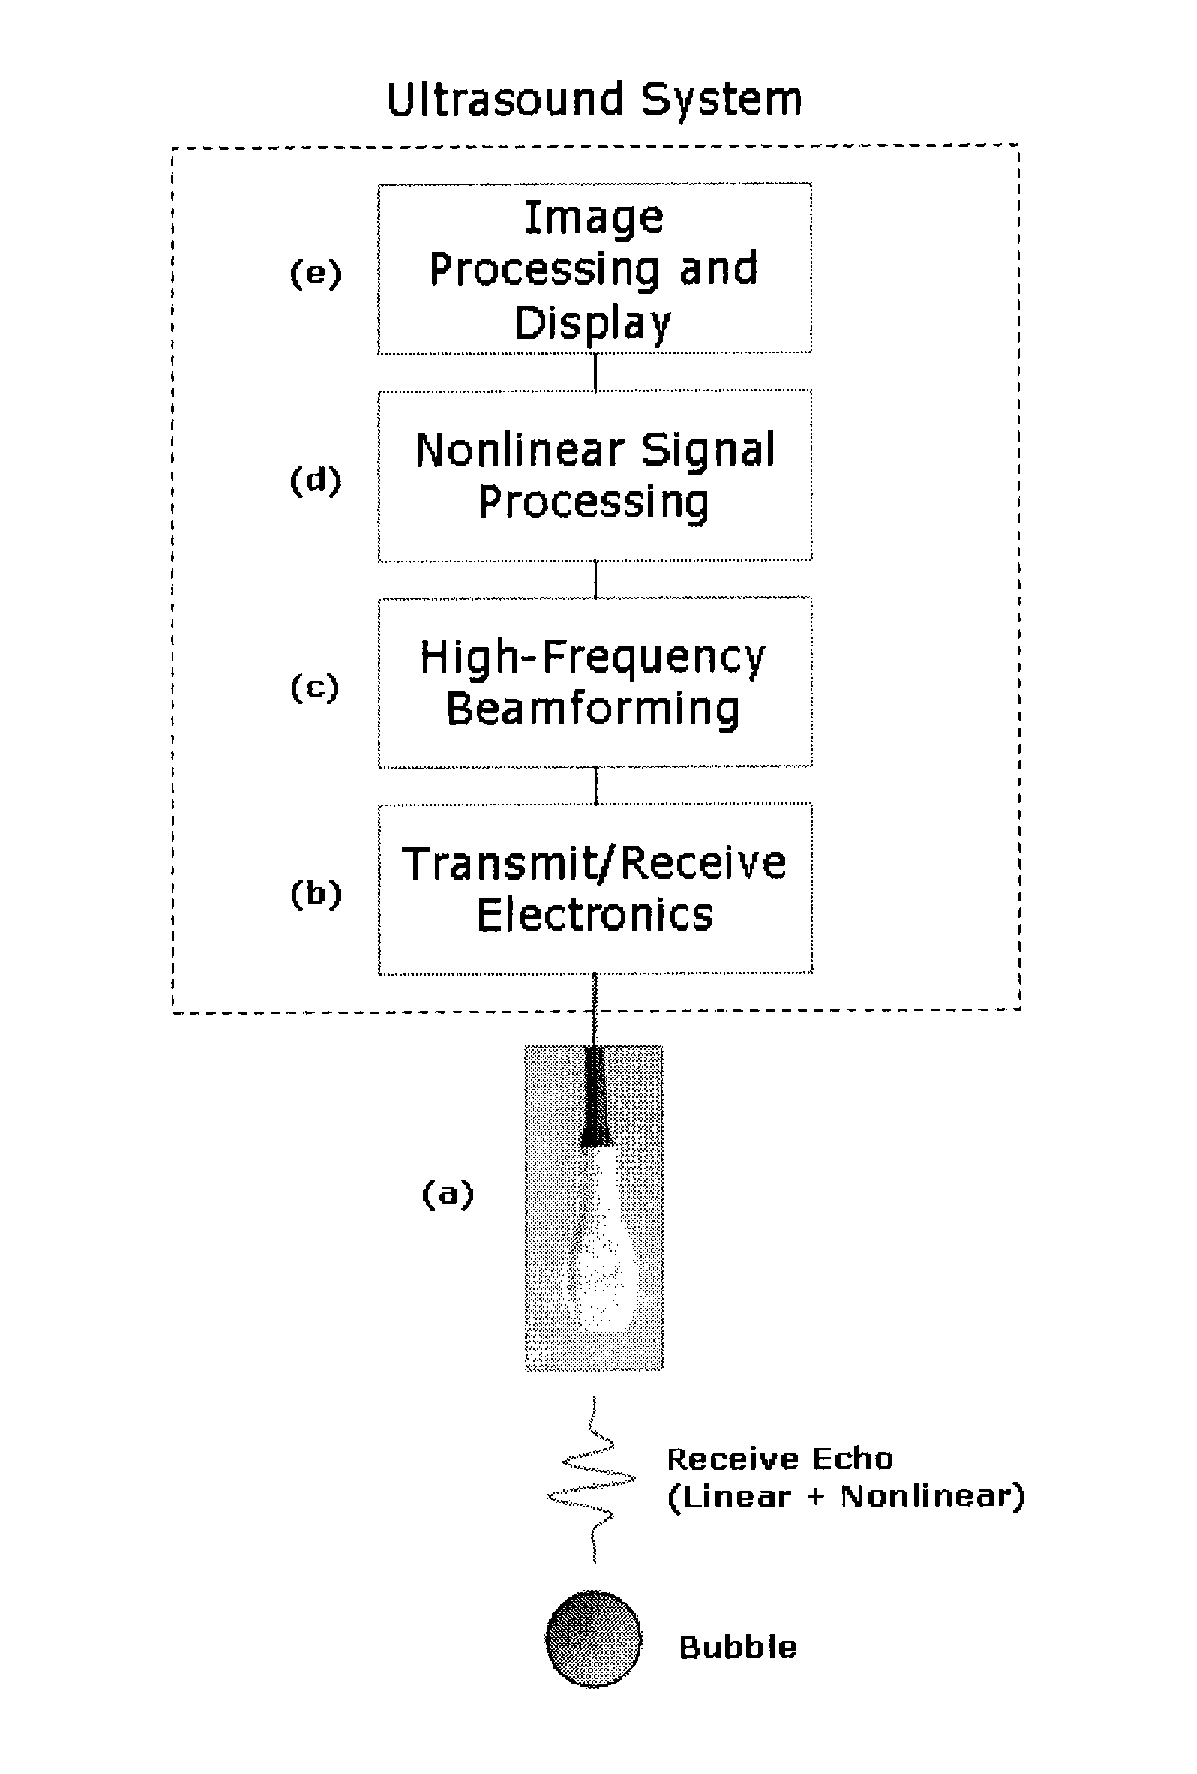 Method for nonlinear imaging of ultrasound contrast agents at high frequencies